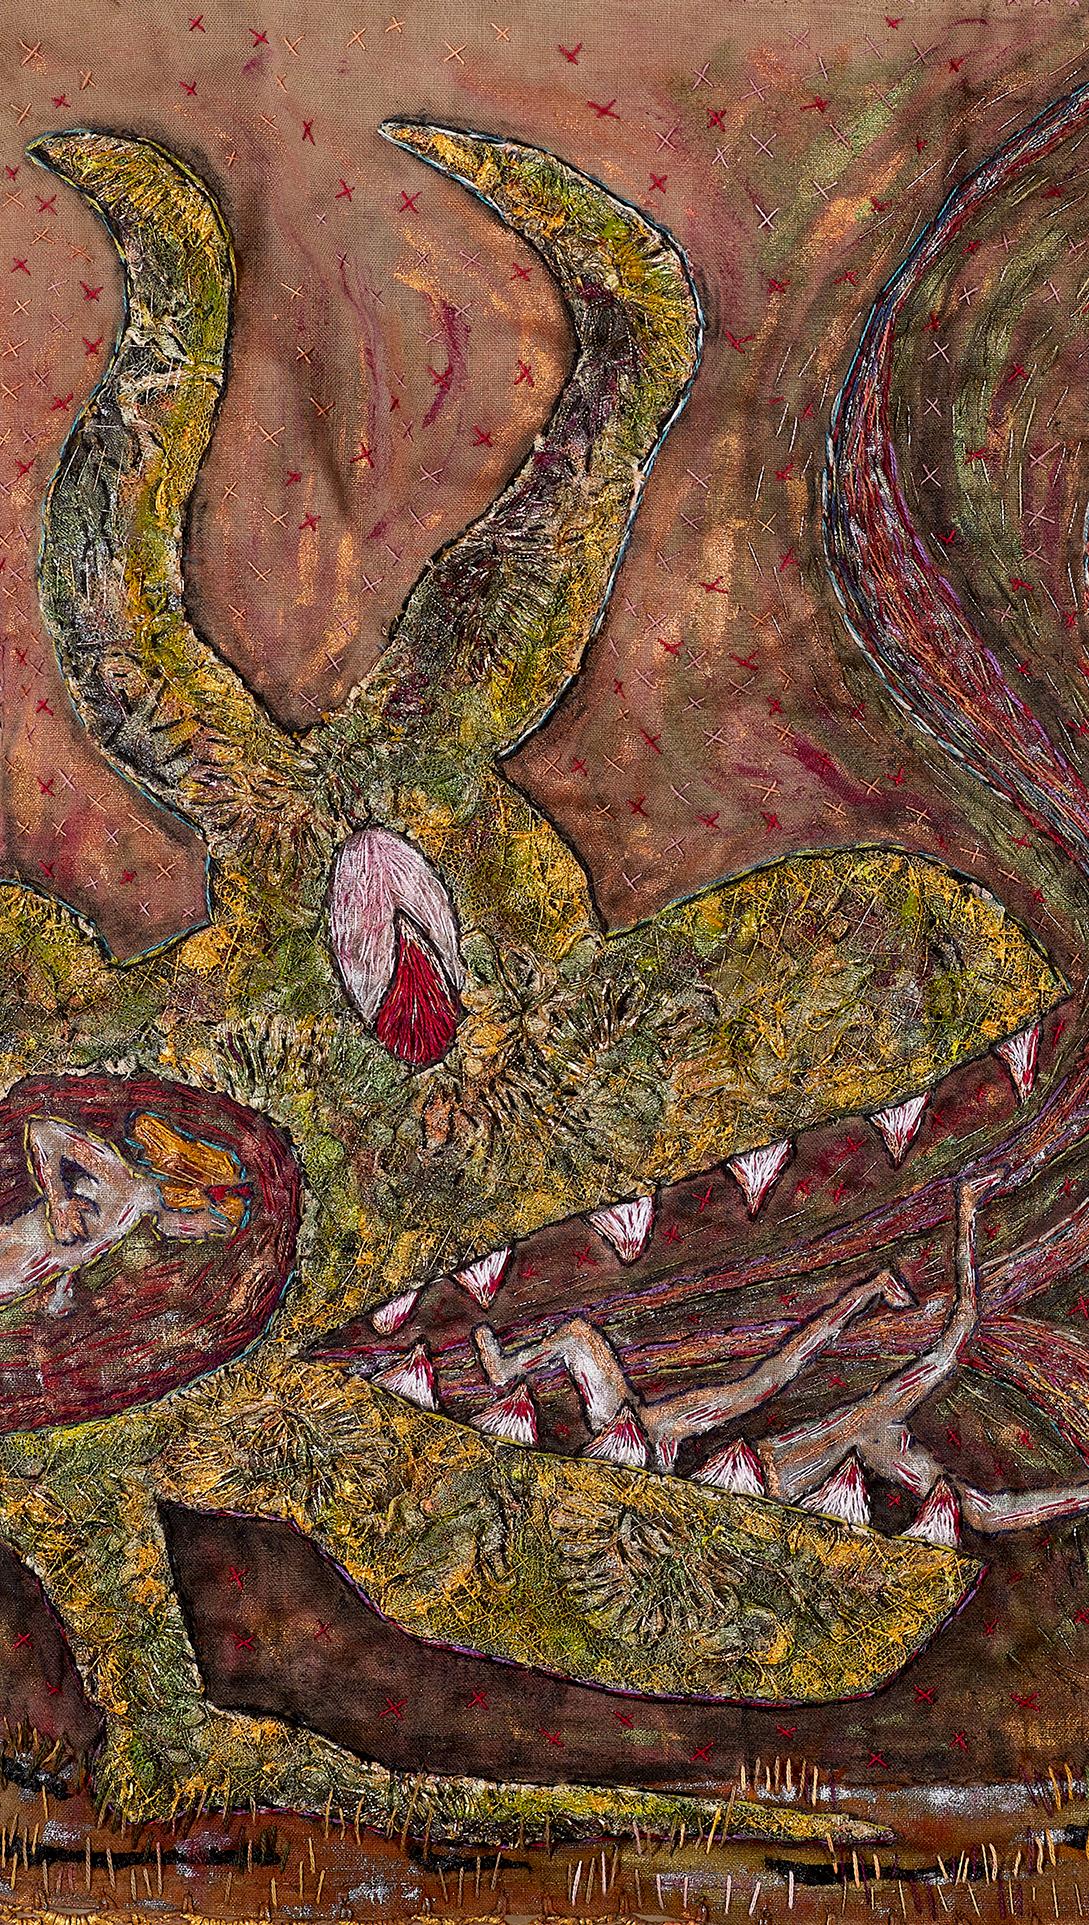 Fiber, Mixed Media, Hand Stitched: 'Hellmouth!' - Contemporary Art by Ann Vollum